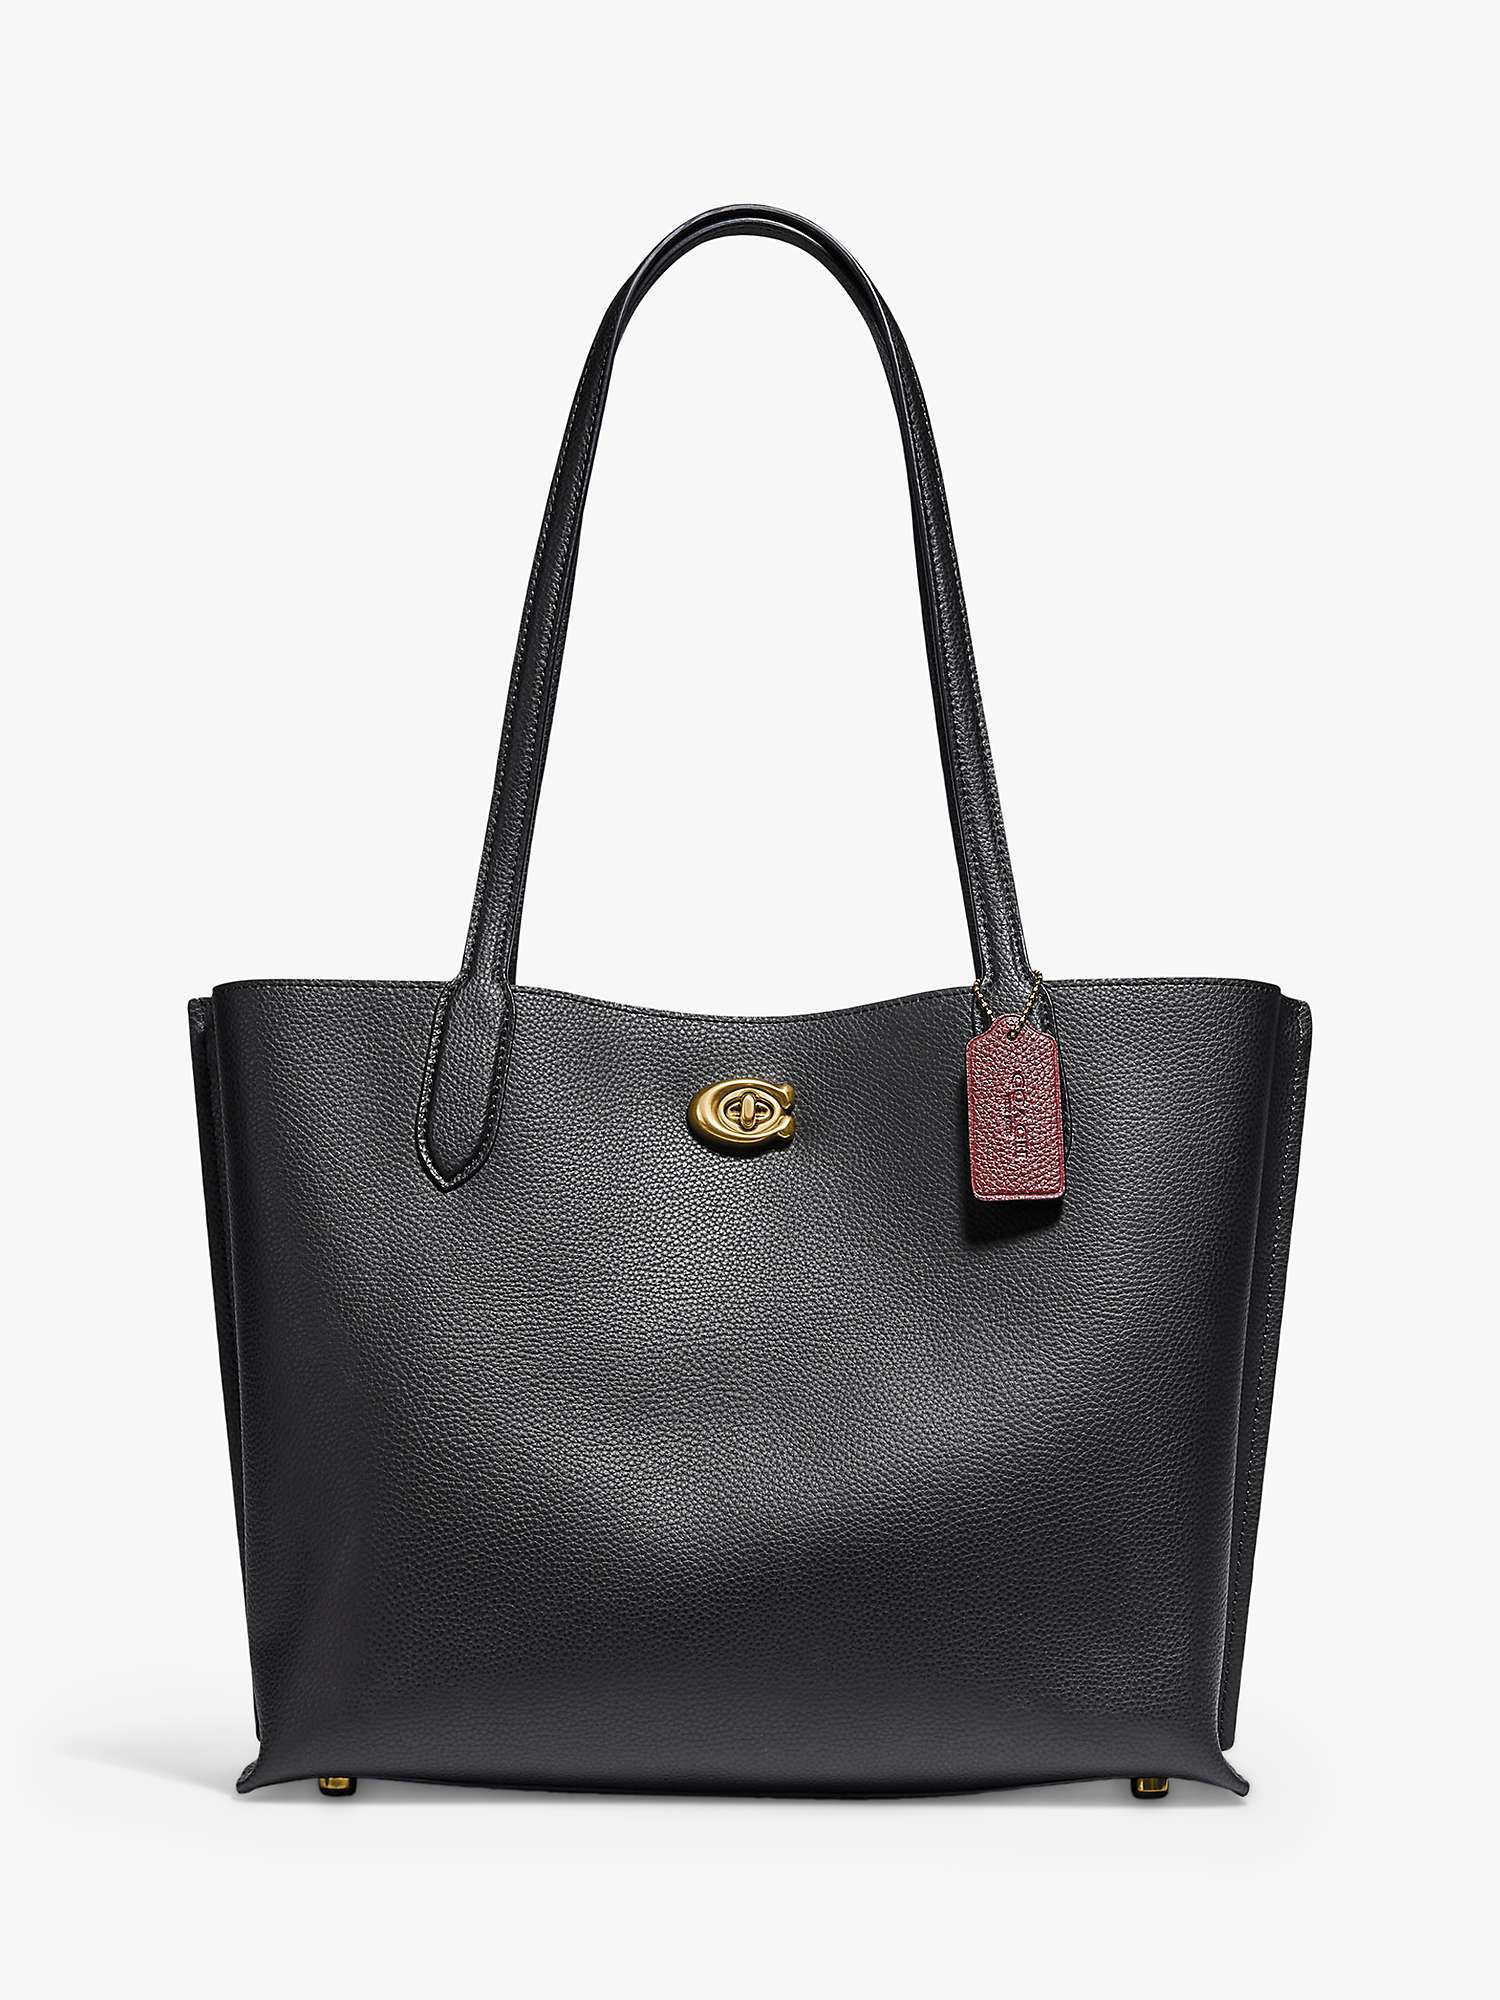 Buy Coach Willow Leather Tote Bag Online at johnlewis.com